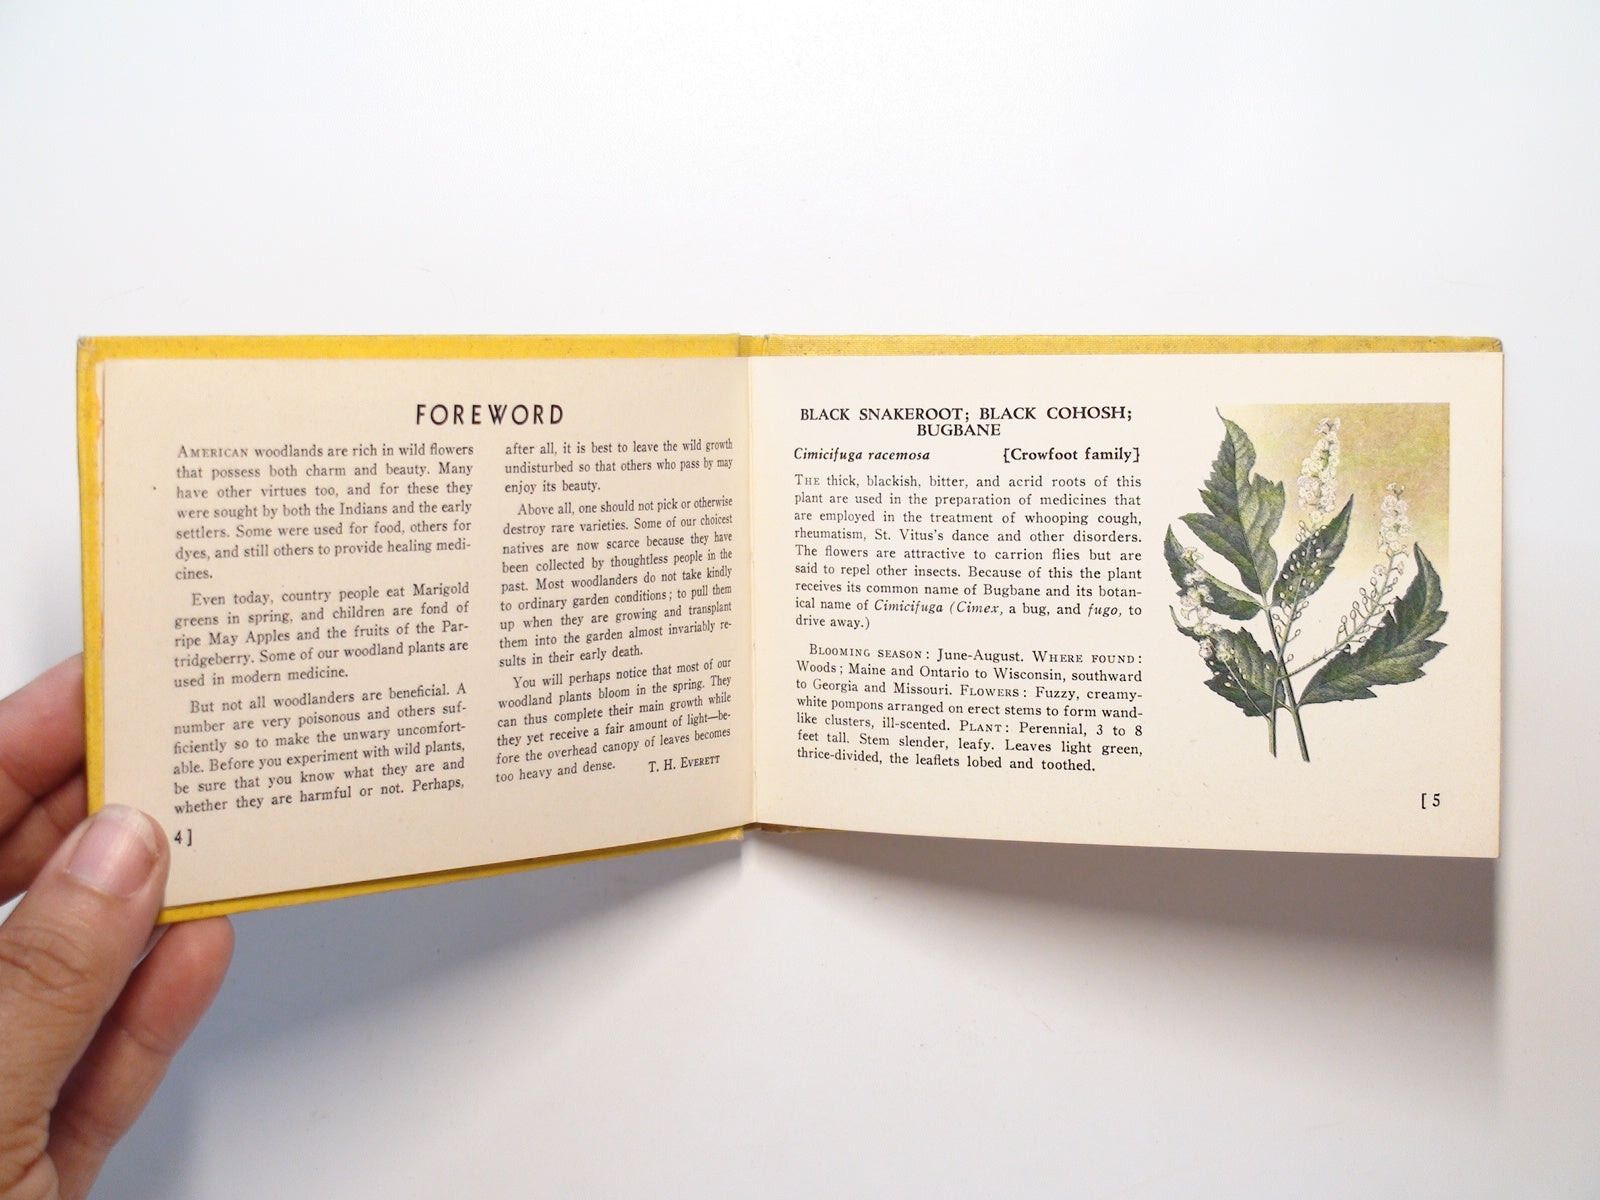 A Guide to Wild Flowers, Woodland Flowers, by T. H. Everett, Illustrated, 1945